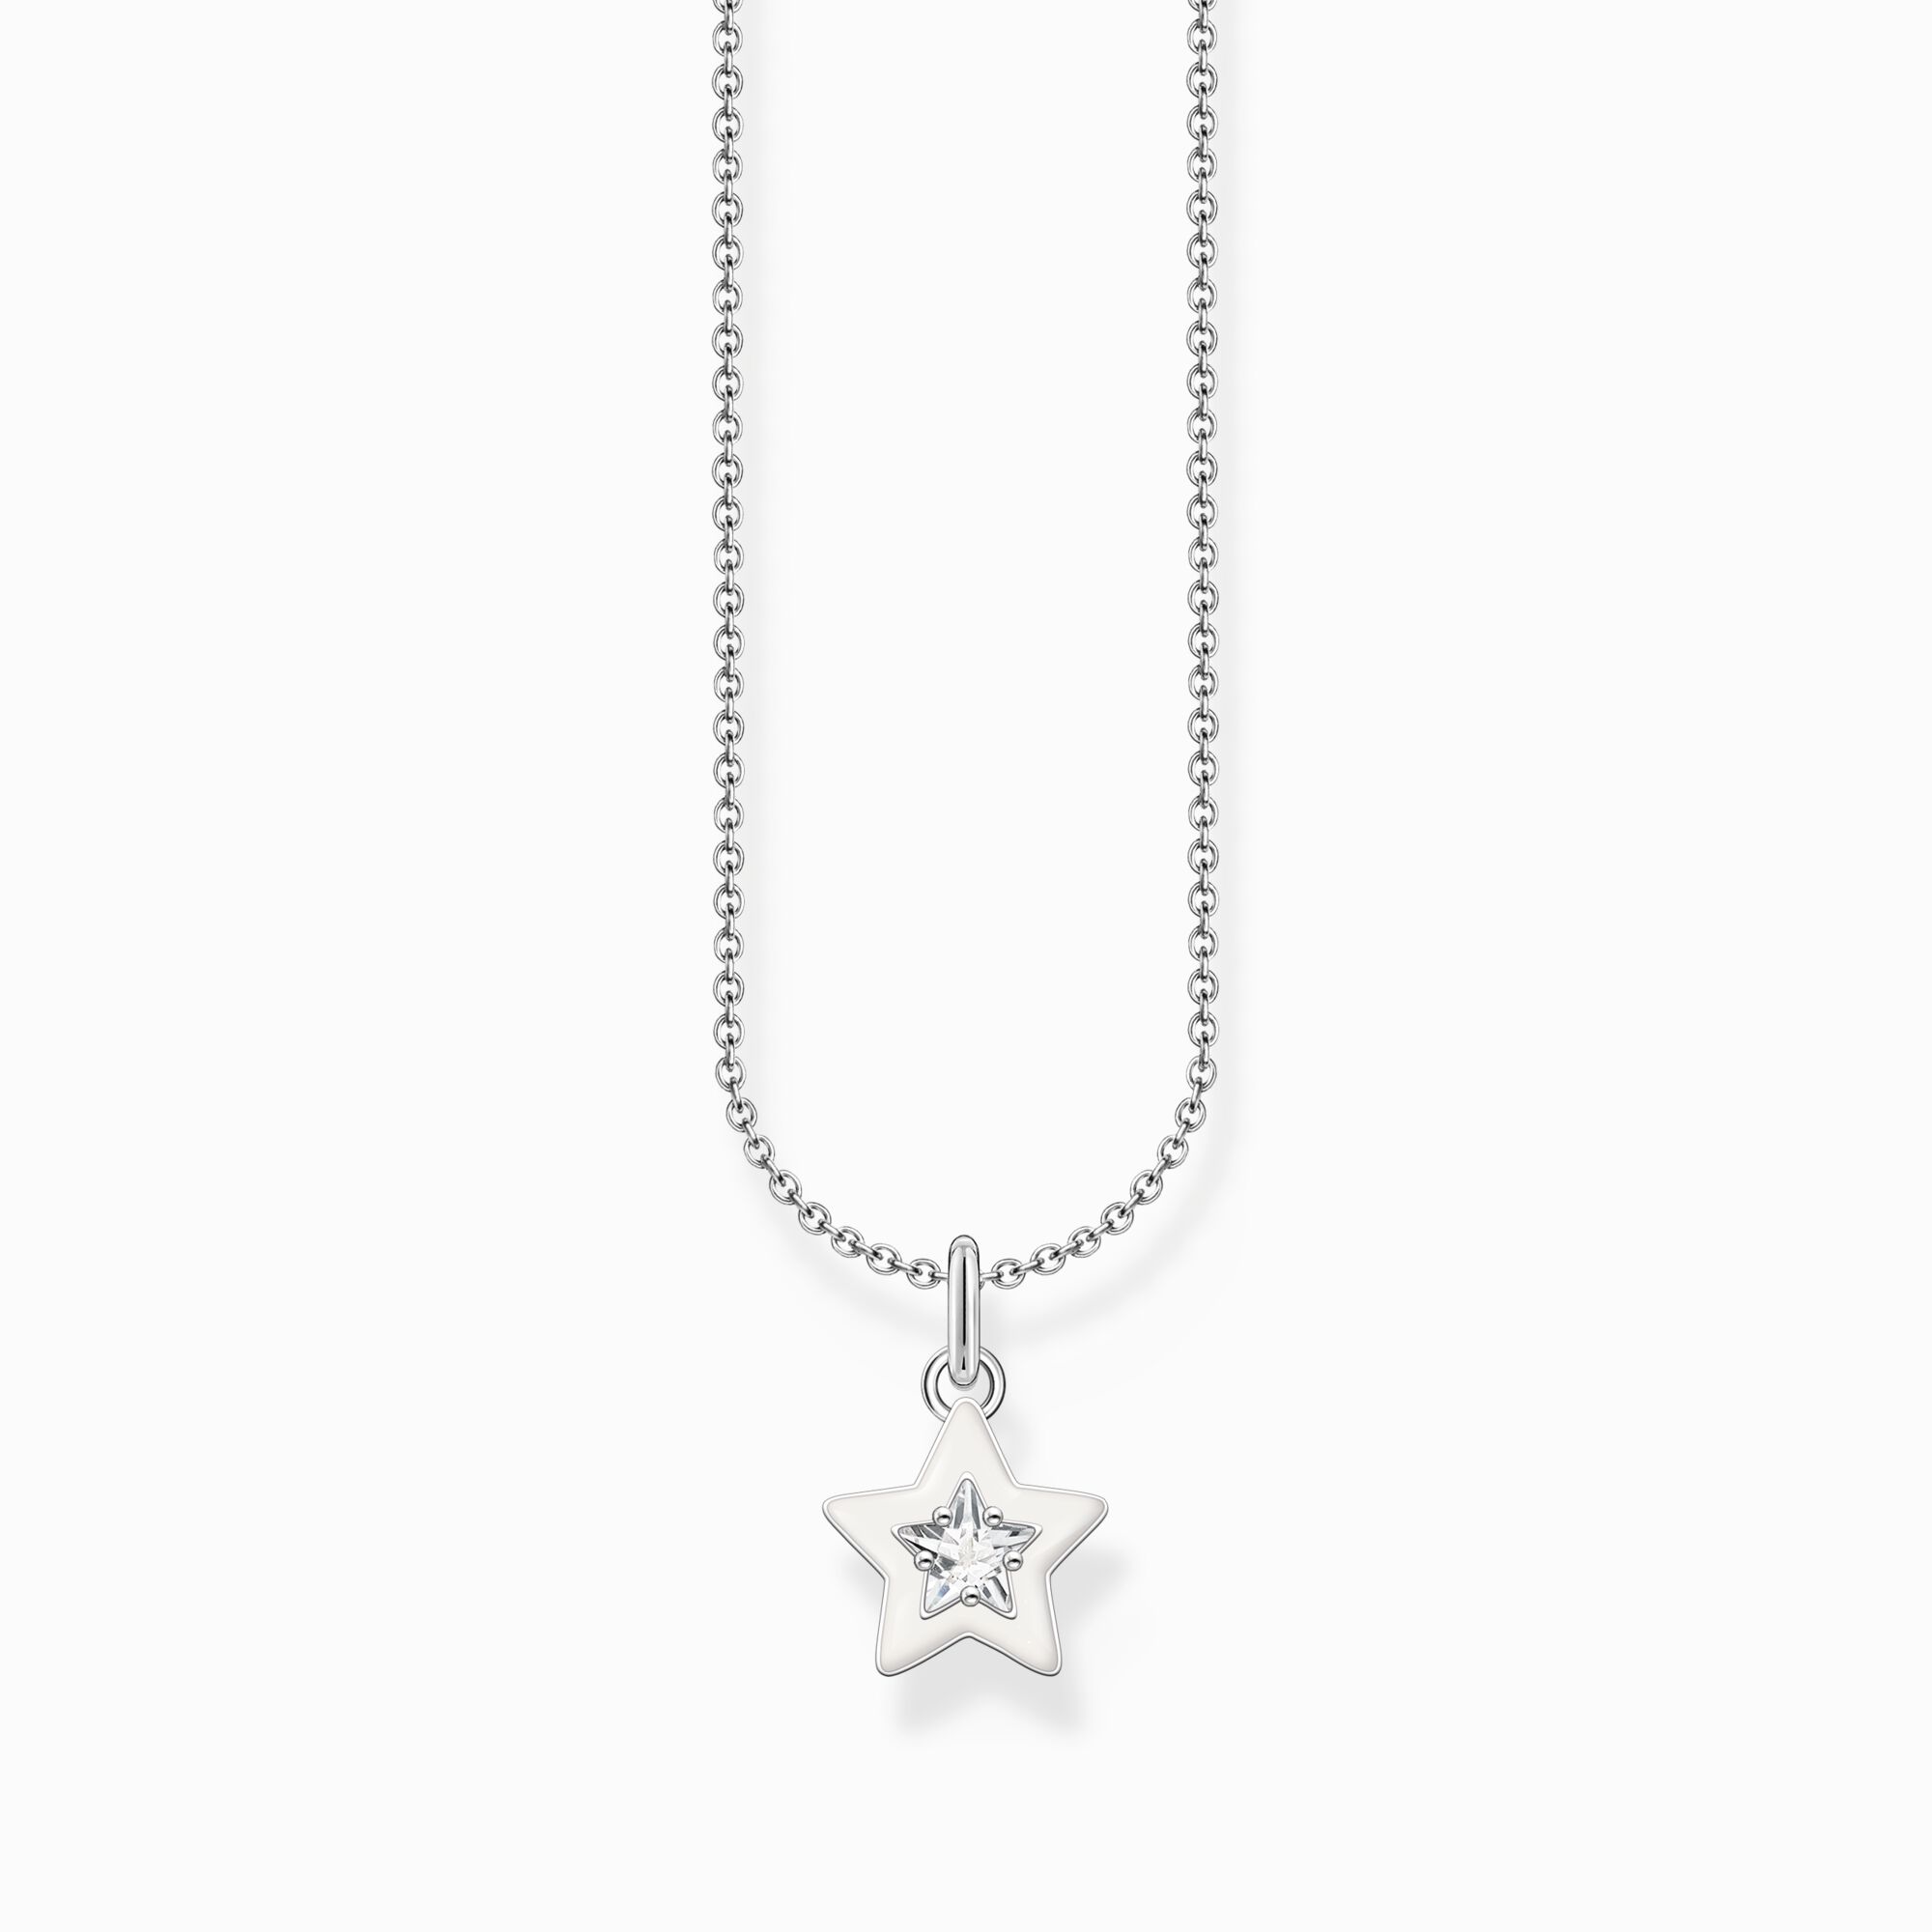 Silver necklace with star pendant and white zirconia from the Charming Collection collection in the THOMAS SABO online store